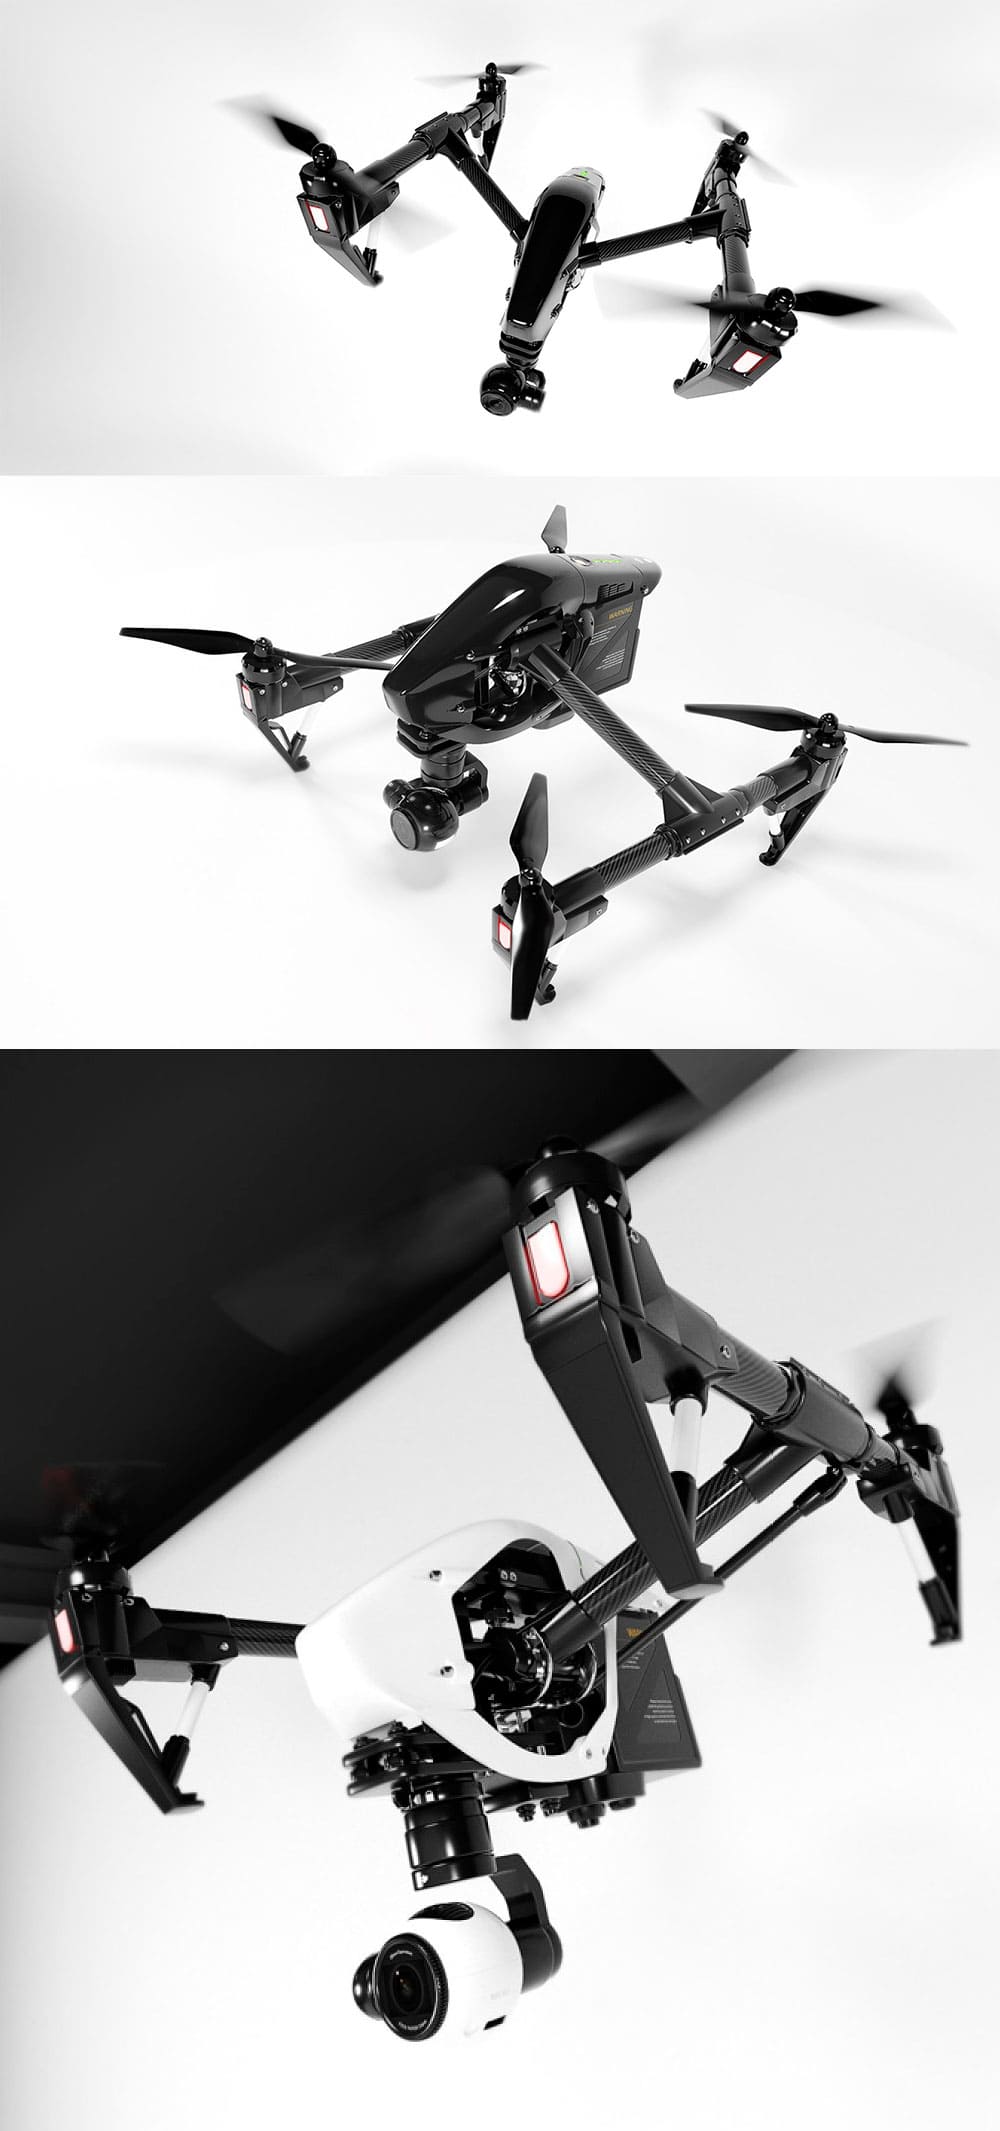 Dji inspire 1 quadcopter, picture for pinterest.